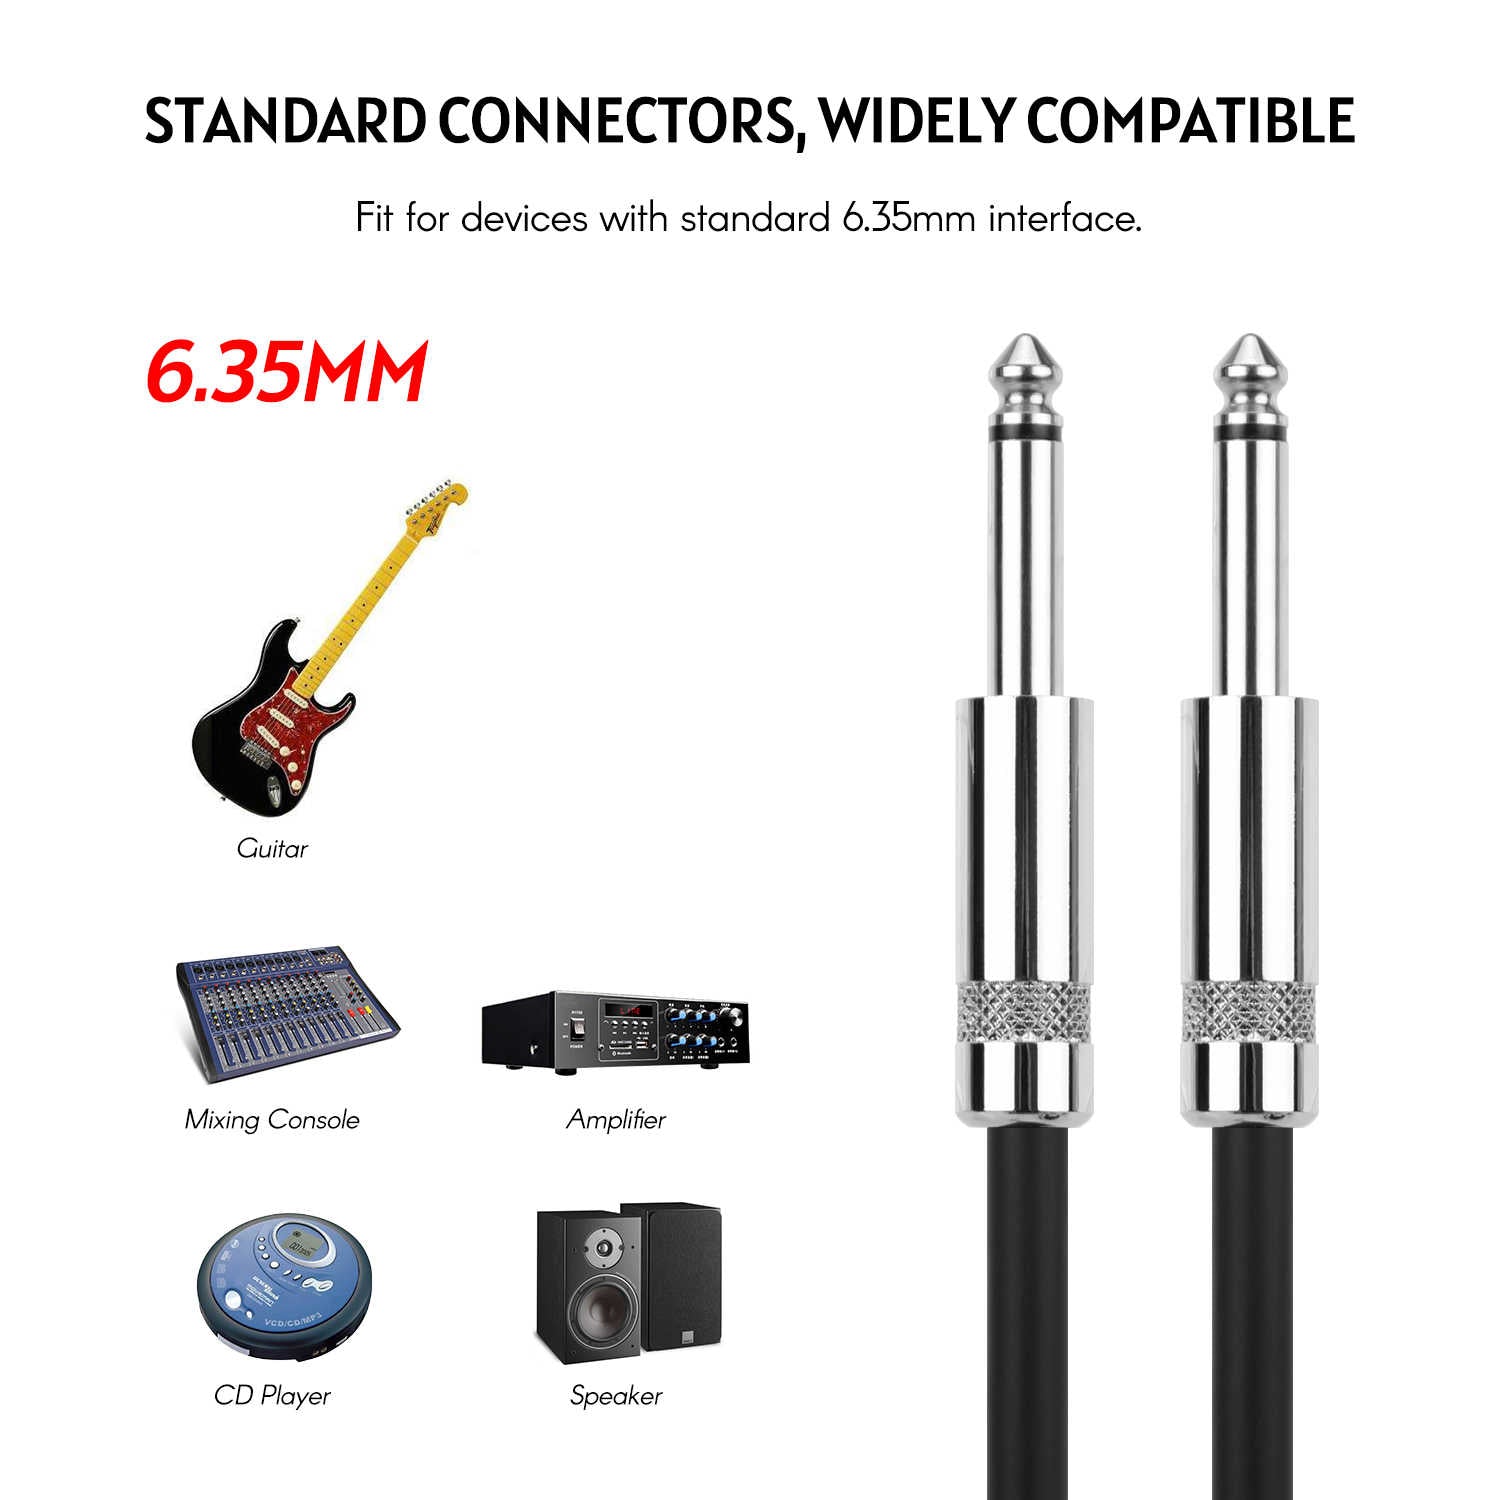 Dây Cáp Kết Nối Giant Instrument Cable - Việt Music